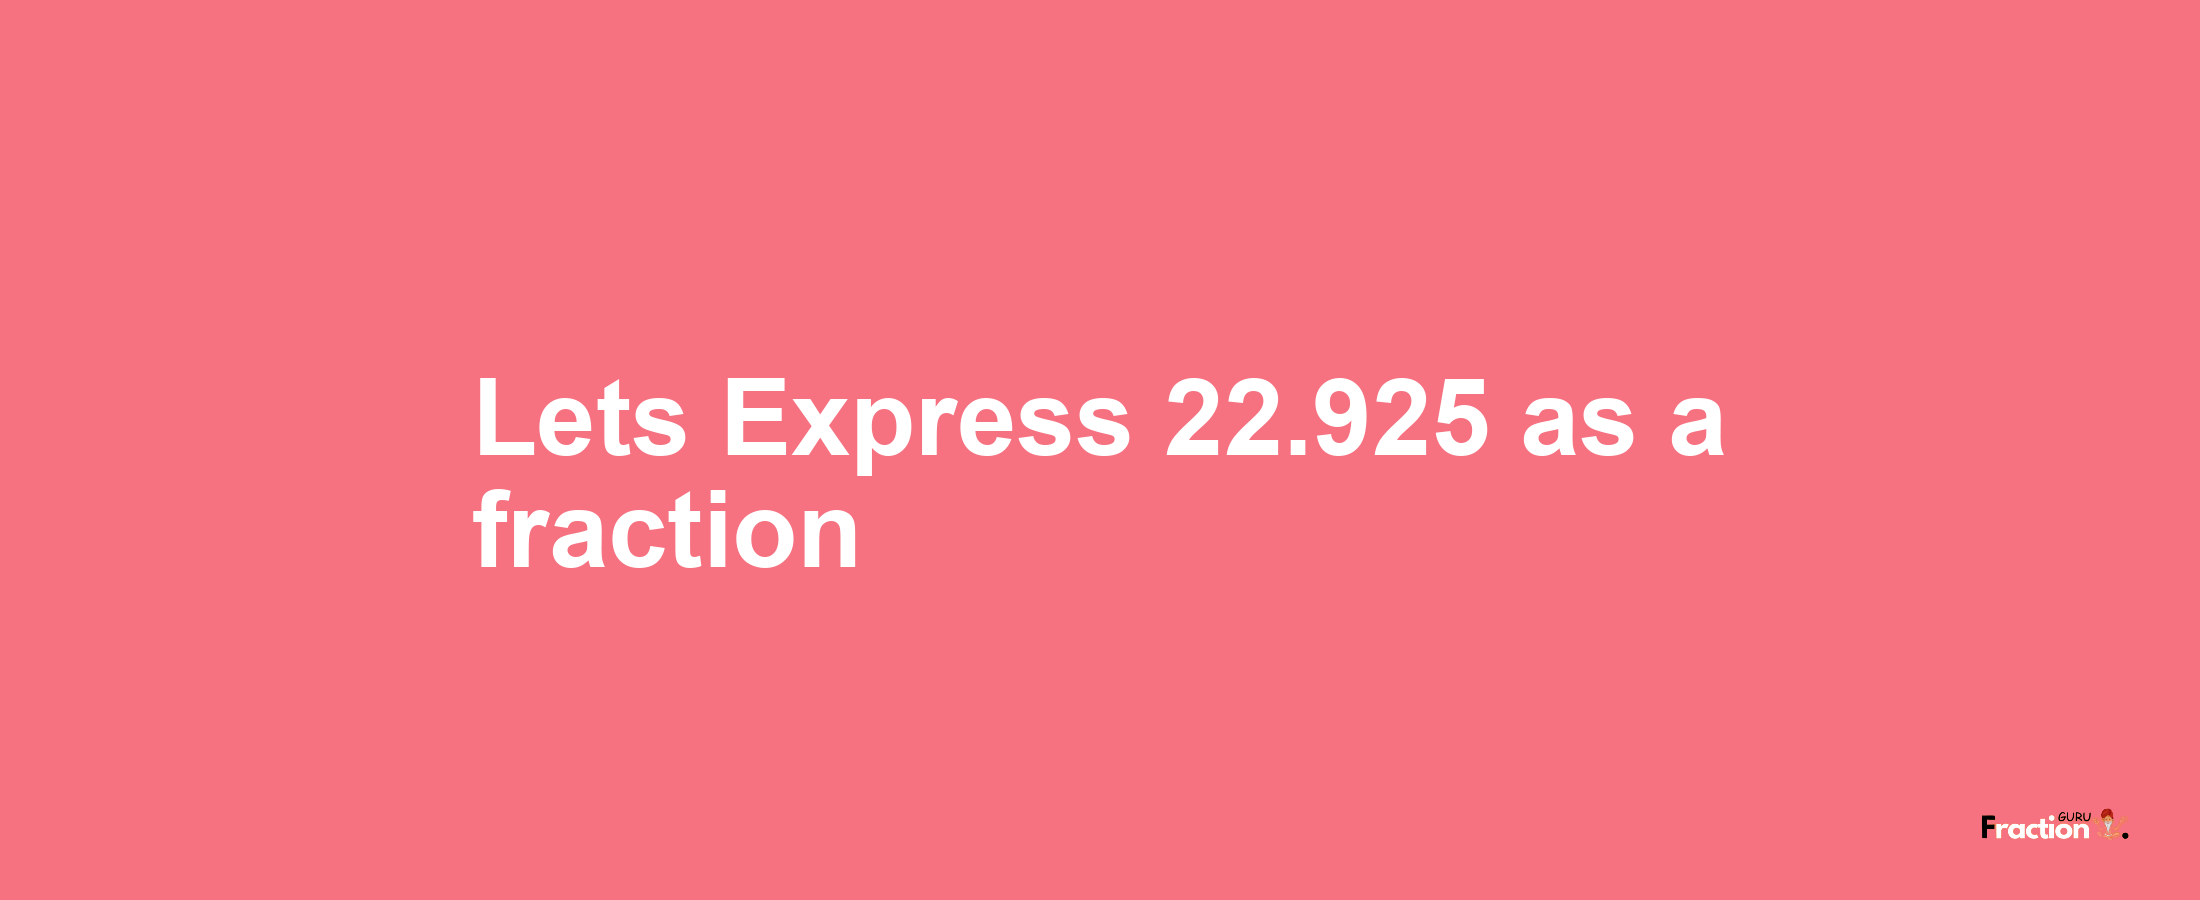 Lets Express 22.925 as afraction